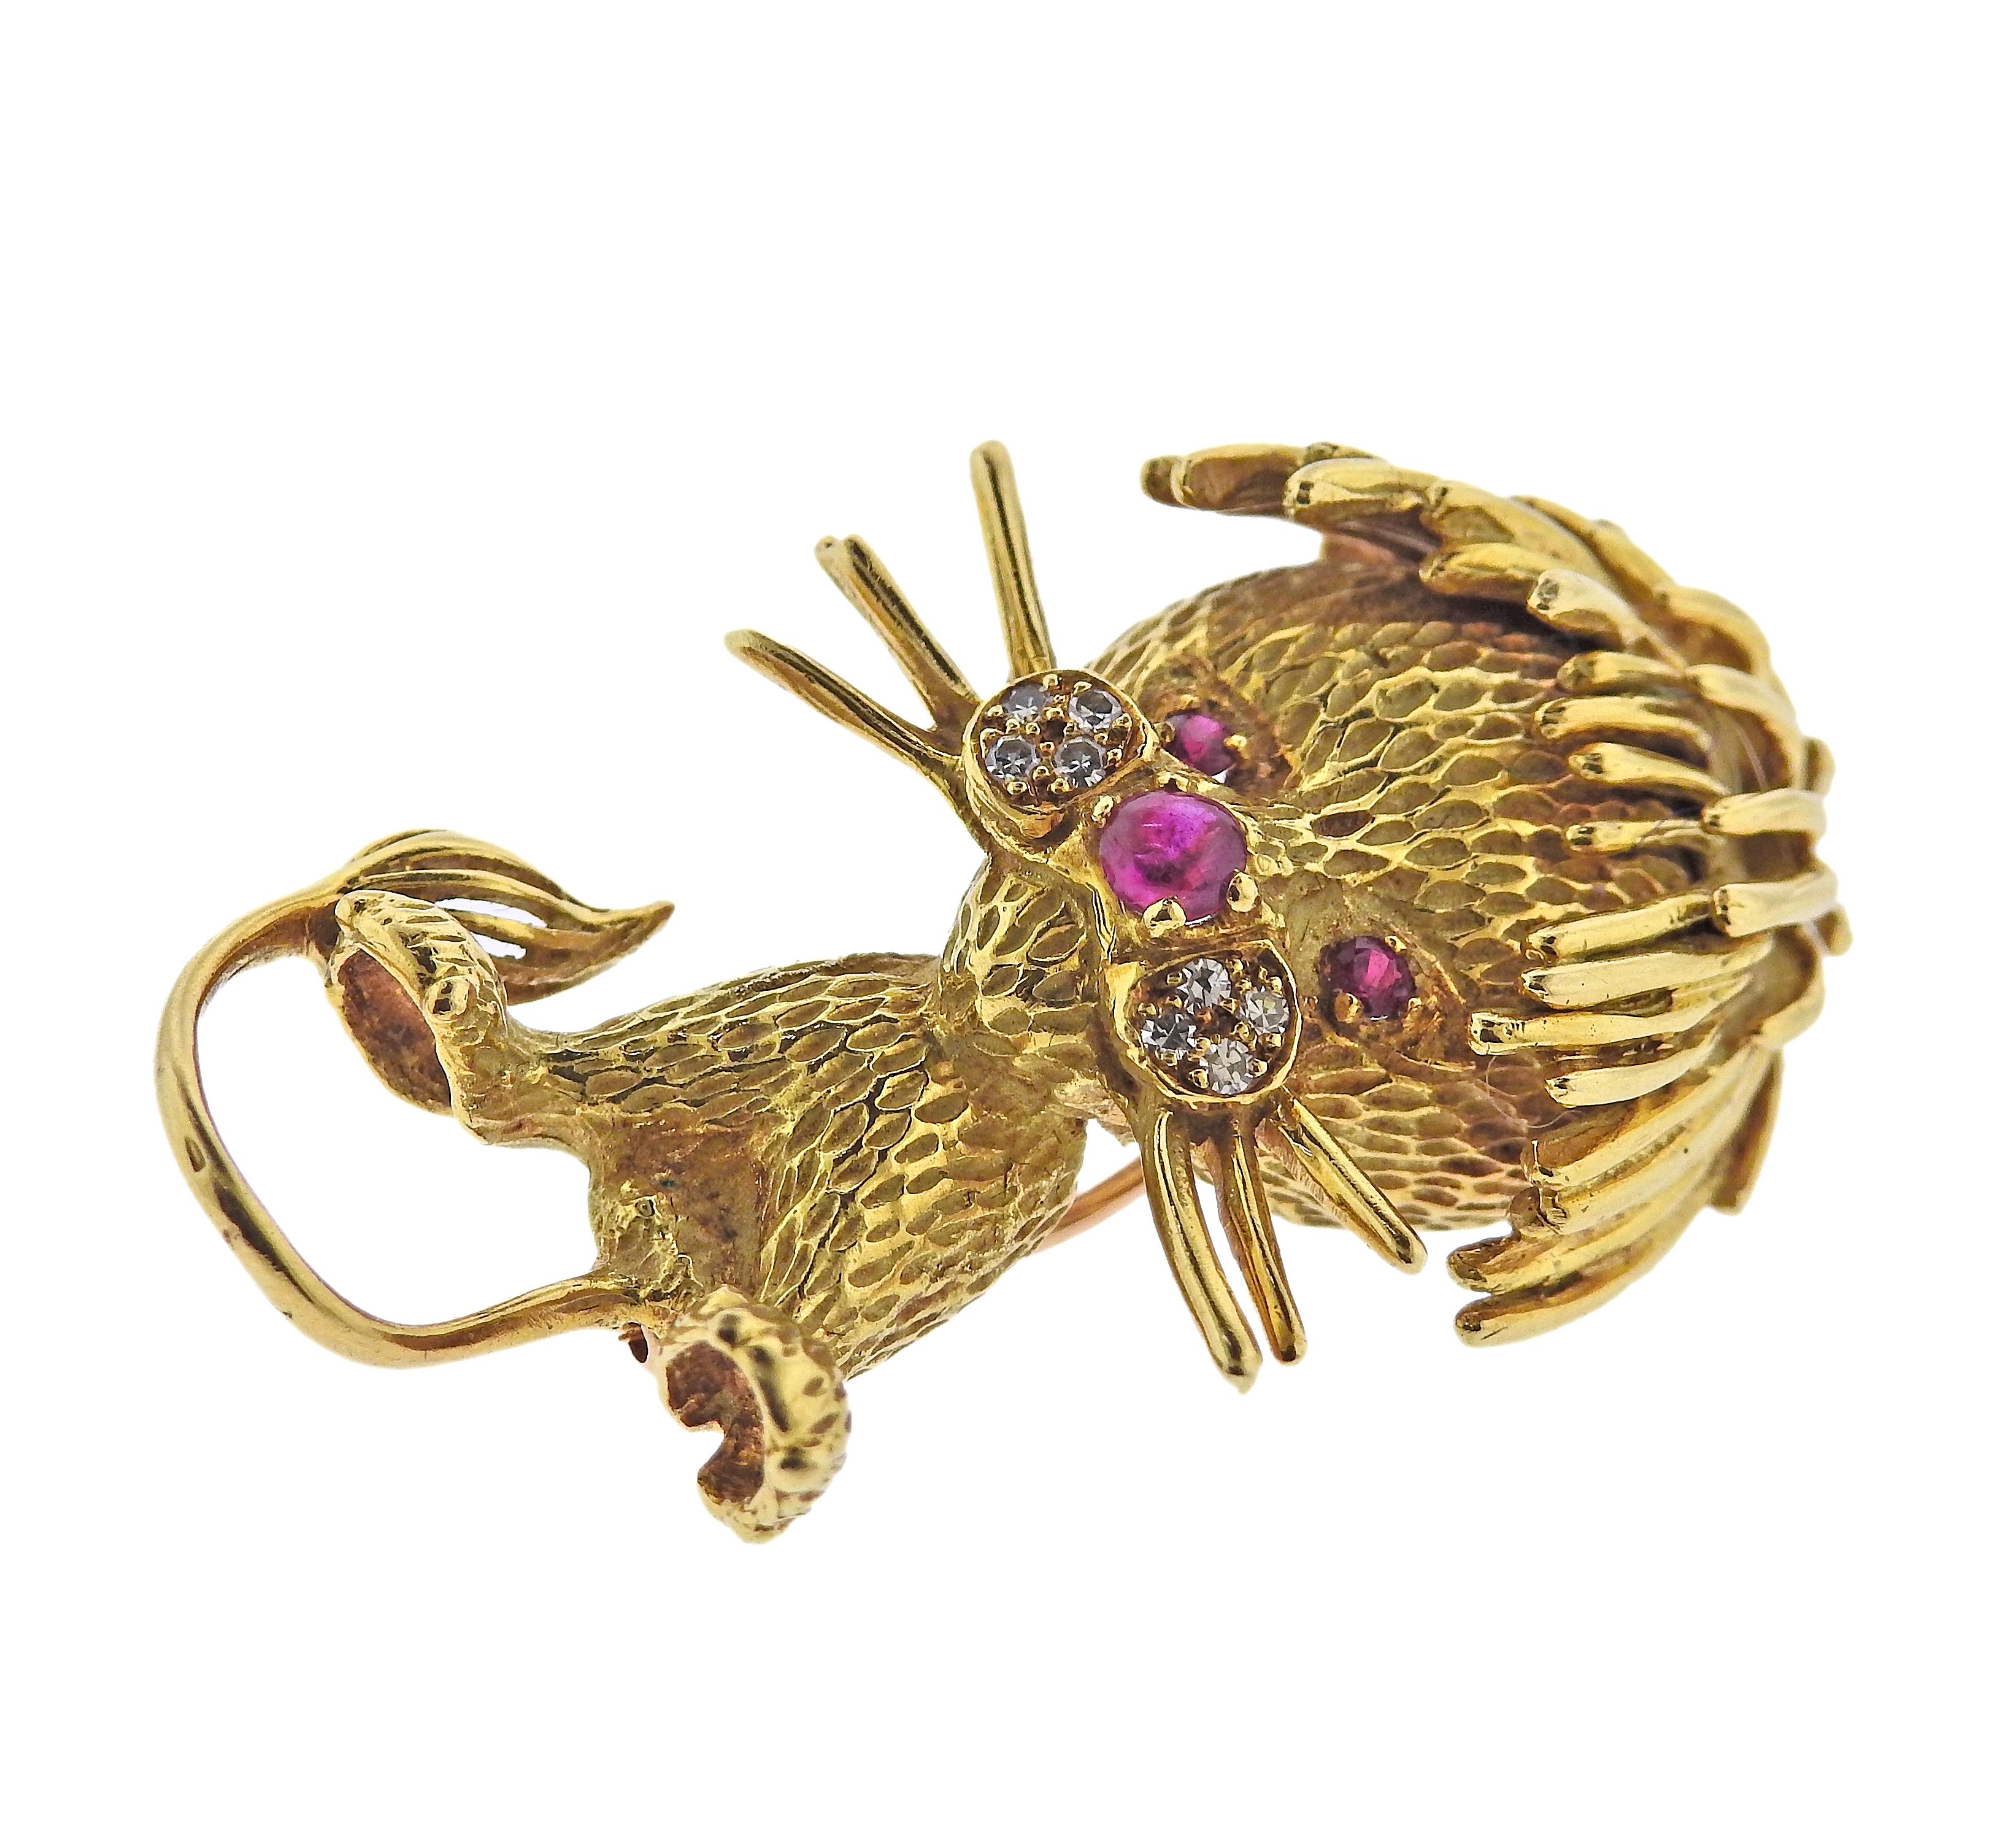 1960s vintage Neiman Marcus 18k gold lion brooch, adorned with rubies and approx. 0.08ctw in diamonds. Brooch measures 45mm x 24mm. Marked with a scratch number on the back NM 4922. 18k. Weight - 20 grams.